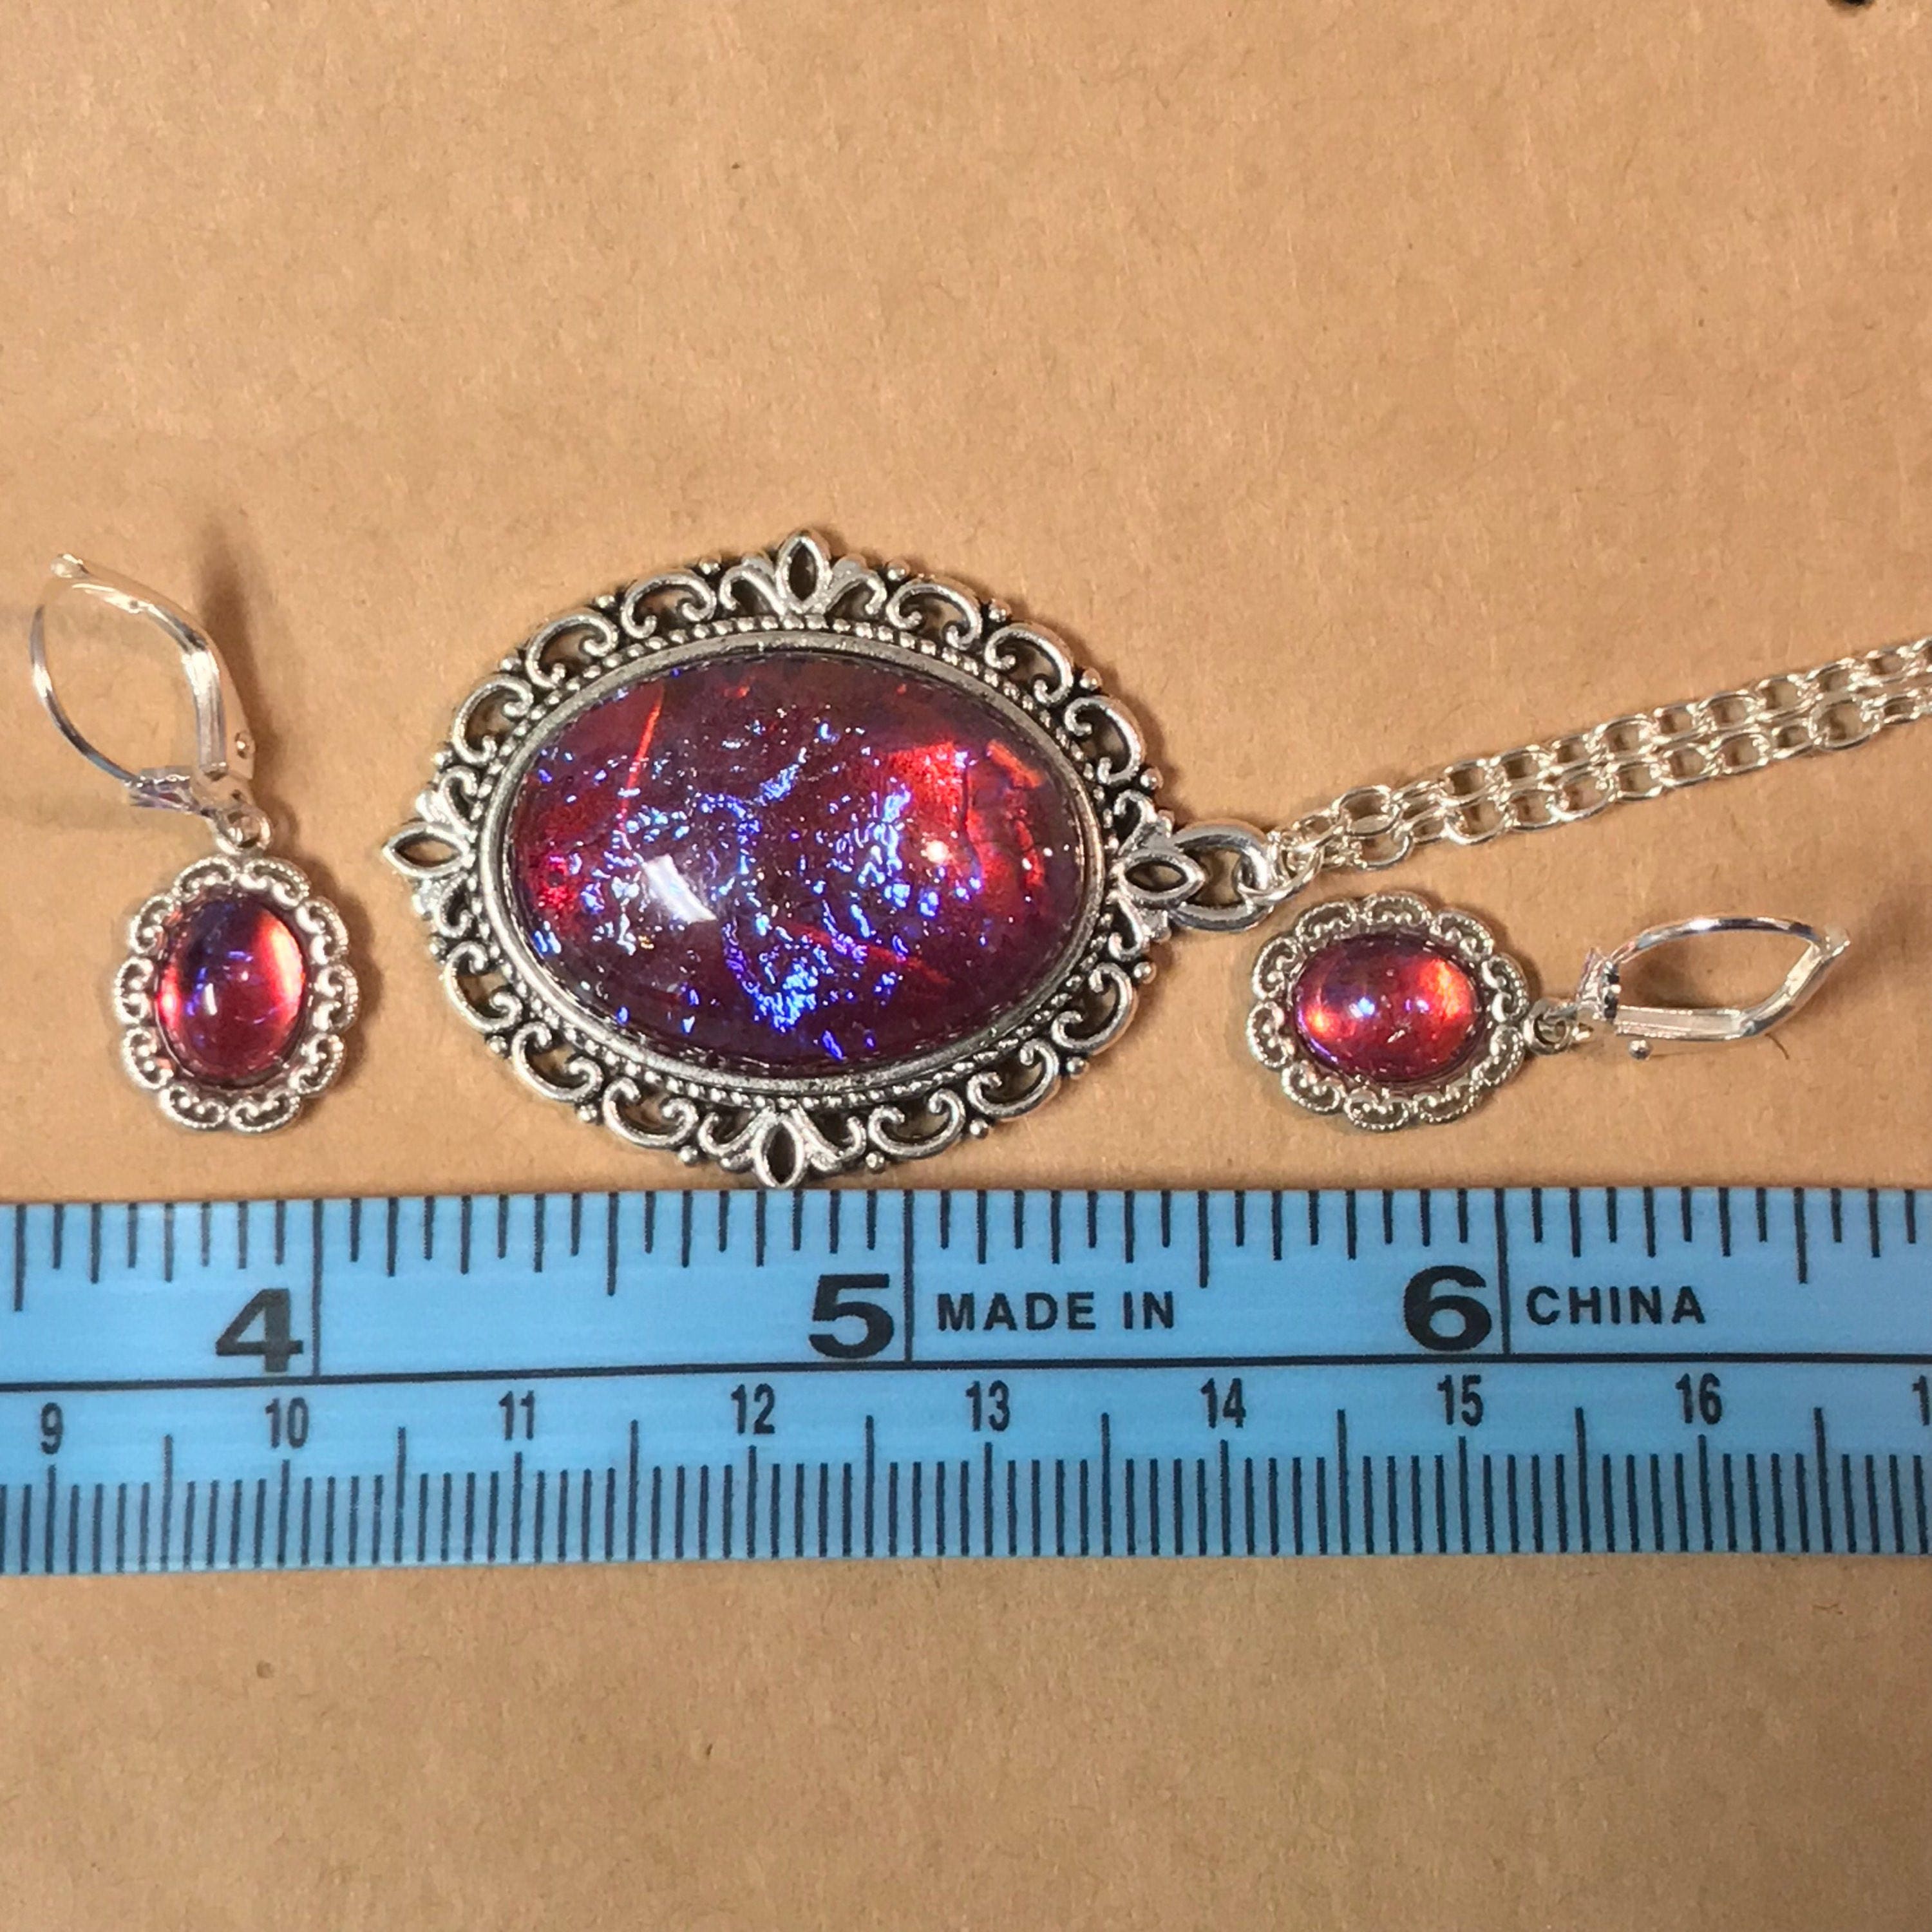 Large Opal Necklace~Mexican Fire Opal~Glass Pendant~opal earrings~Red ...